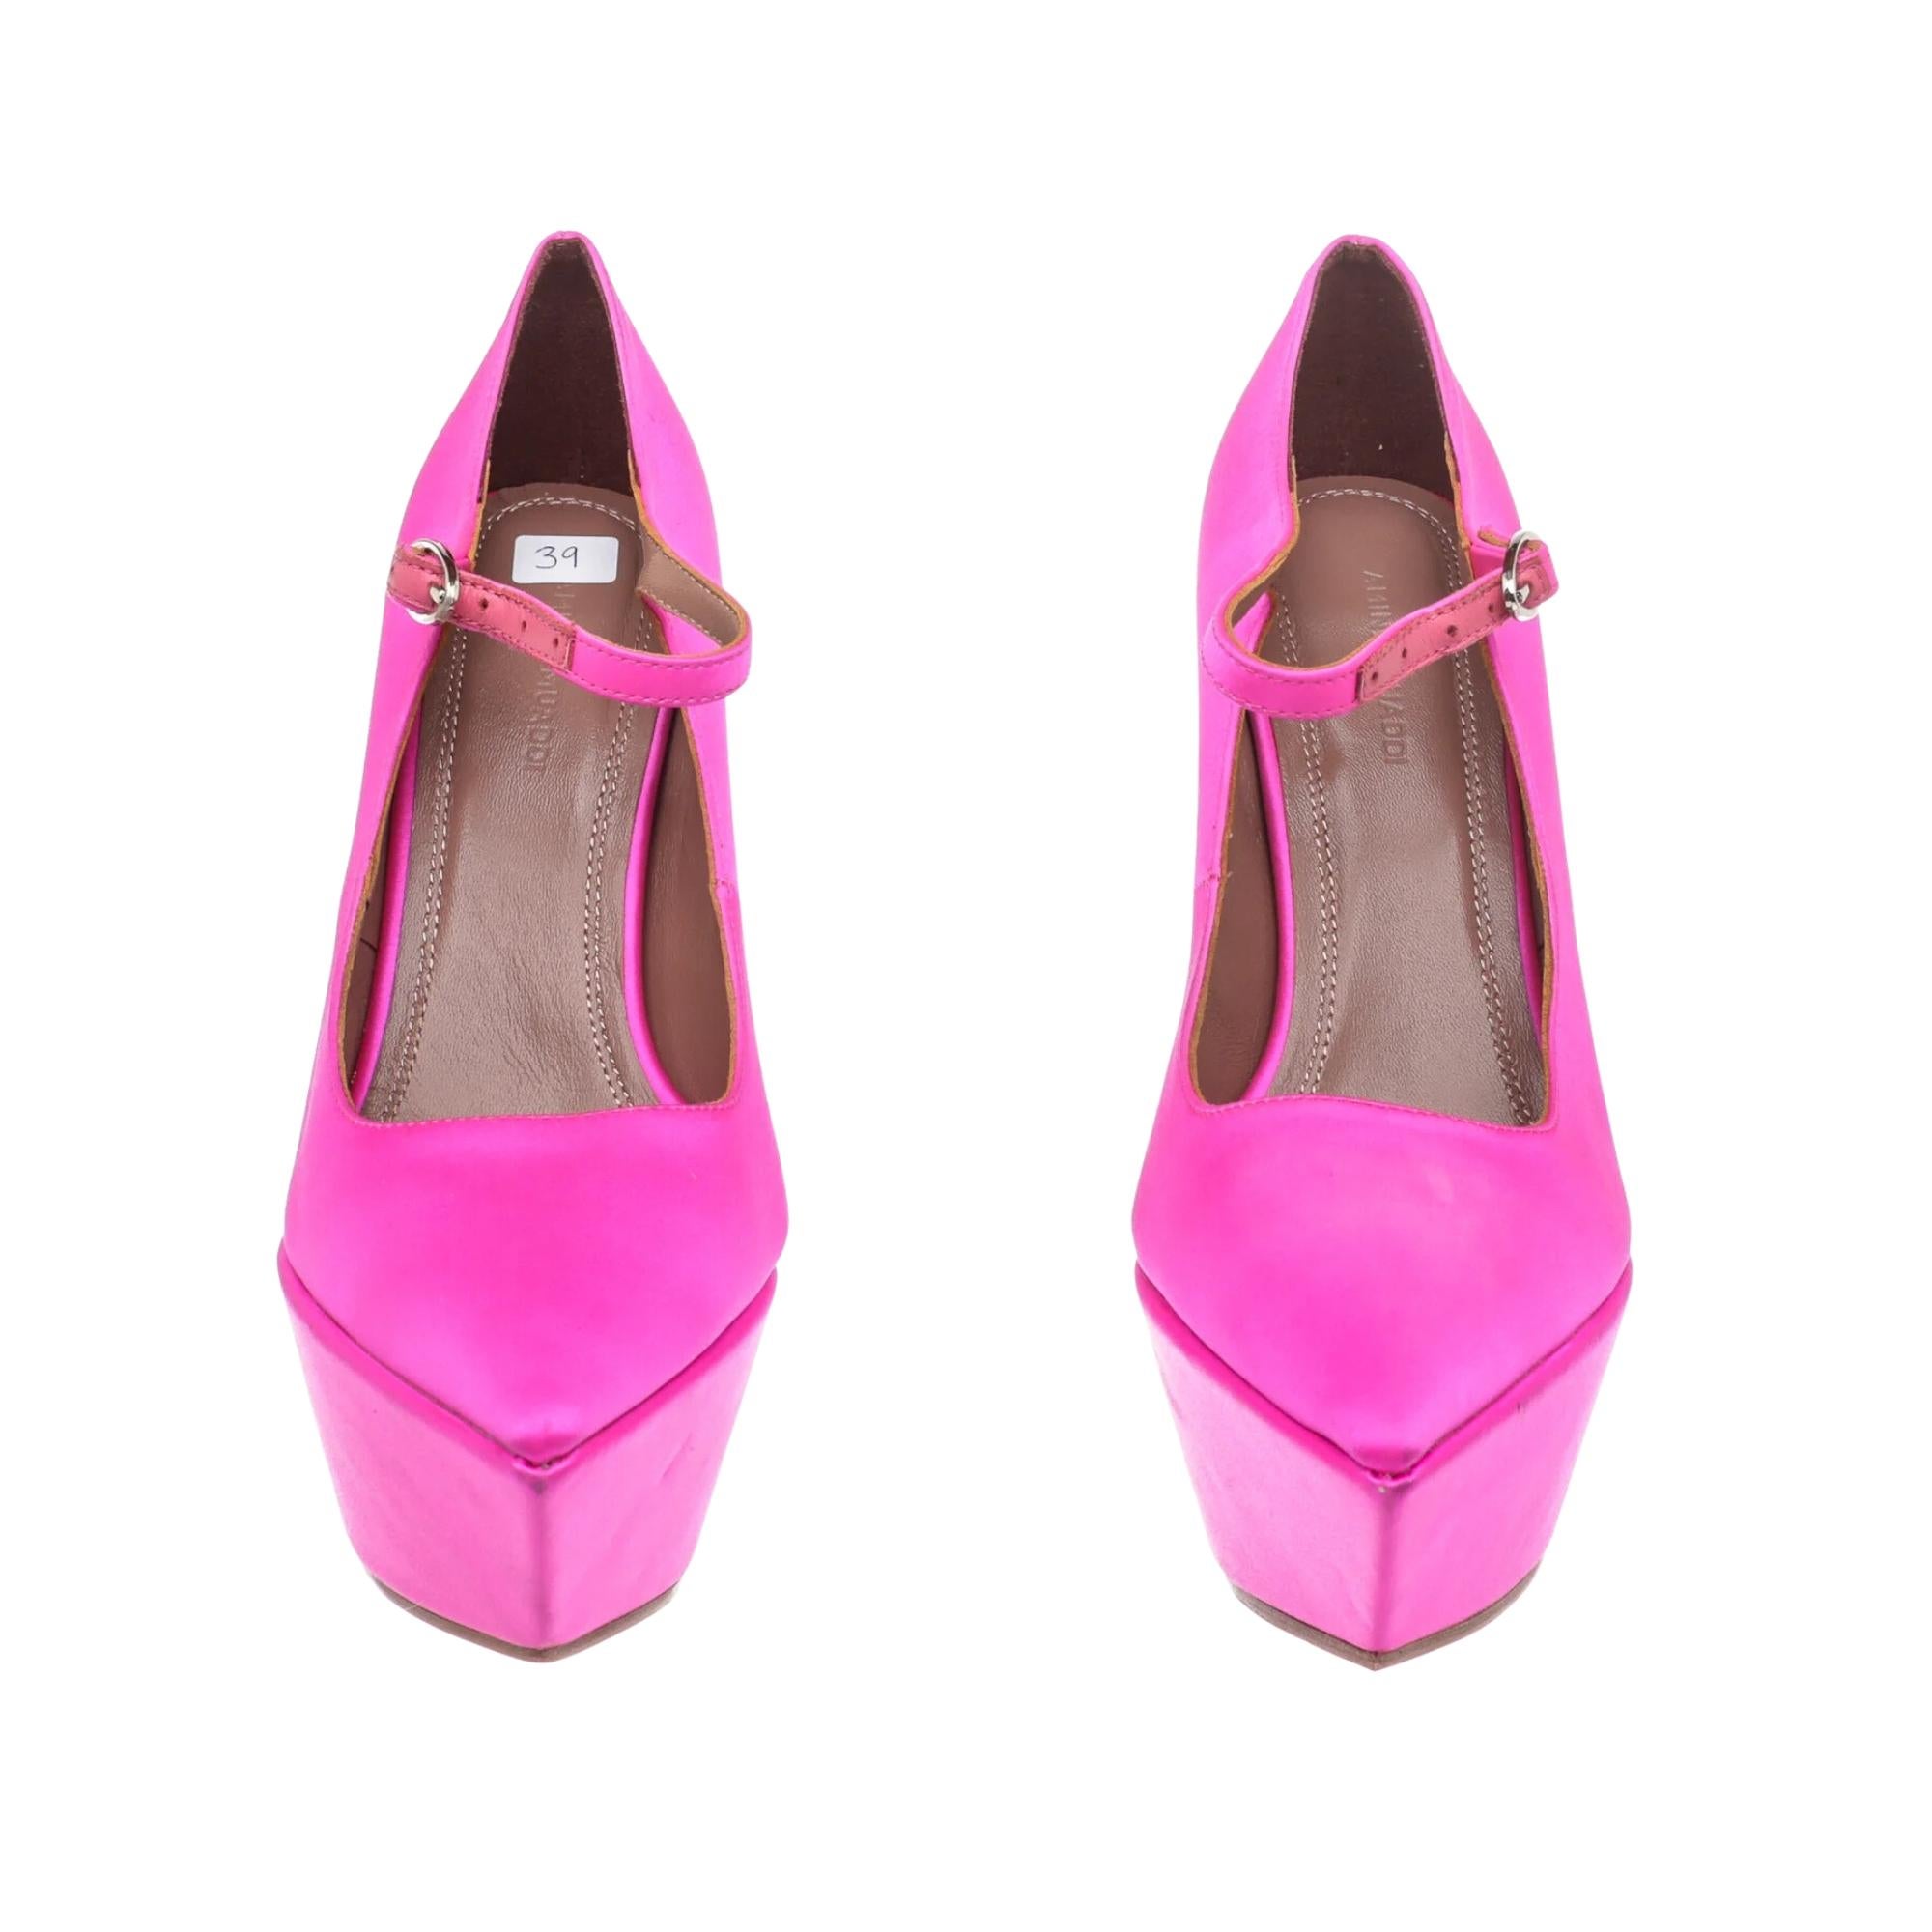 Amina Muaddi Angelica Plateau Pink Satin Platform Pumps (39 EU) In Good Condition For Sale In Montreal, Quebec